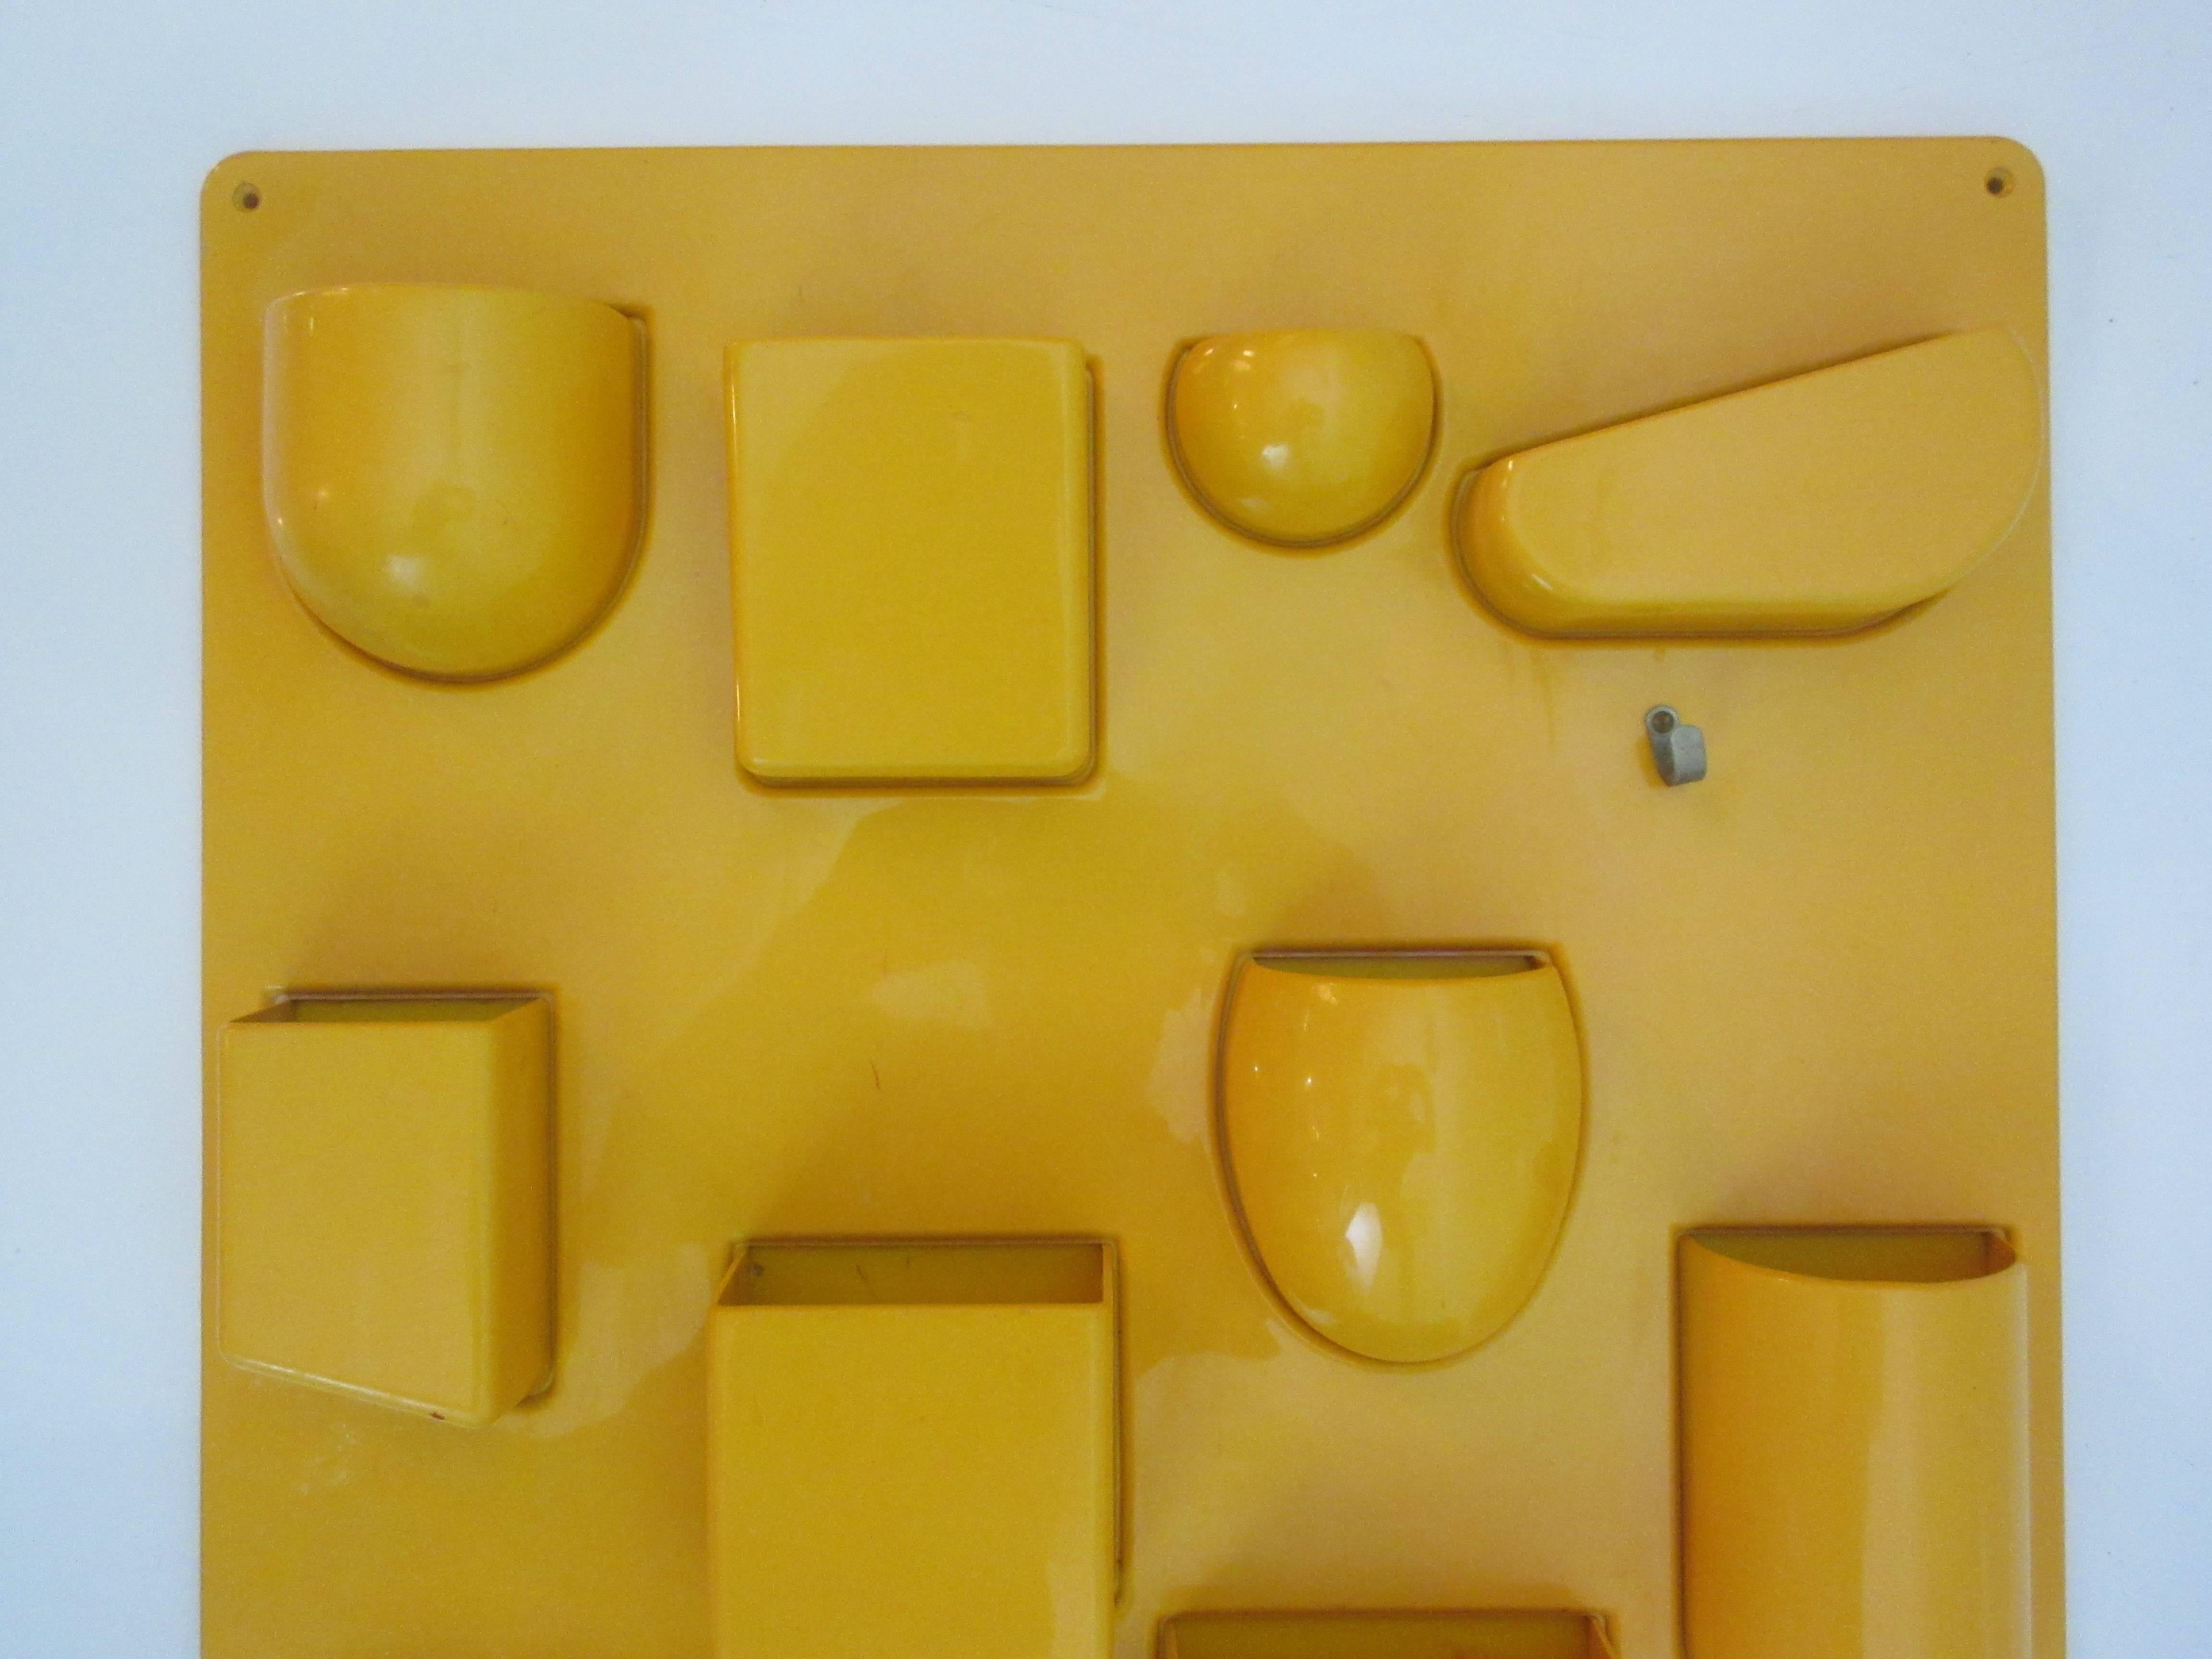 Wall-All by Dorothee Mauer-Becker for Ingo Mauer Uten, Silo I from 1969 in sunflower yellow plastic. It will organize your life! Great for kitchen, office art studio, bathroom or kids room. First exhibited at the Frankfort design fair in 1969 and